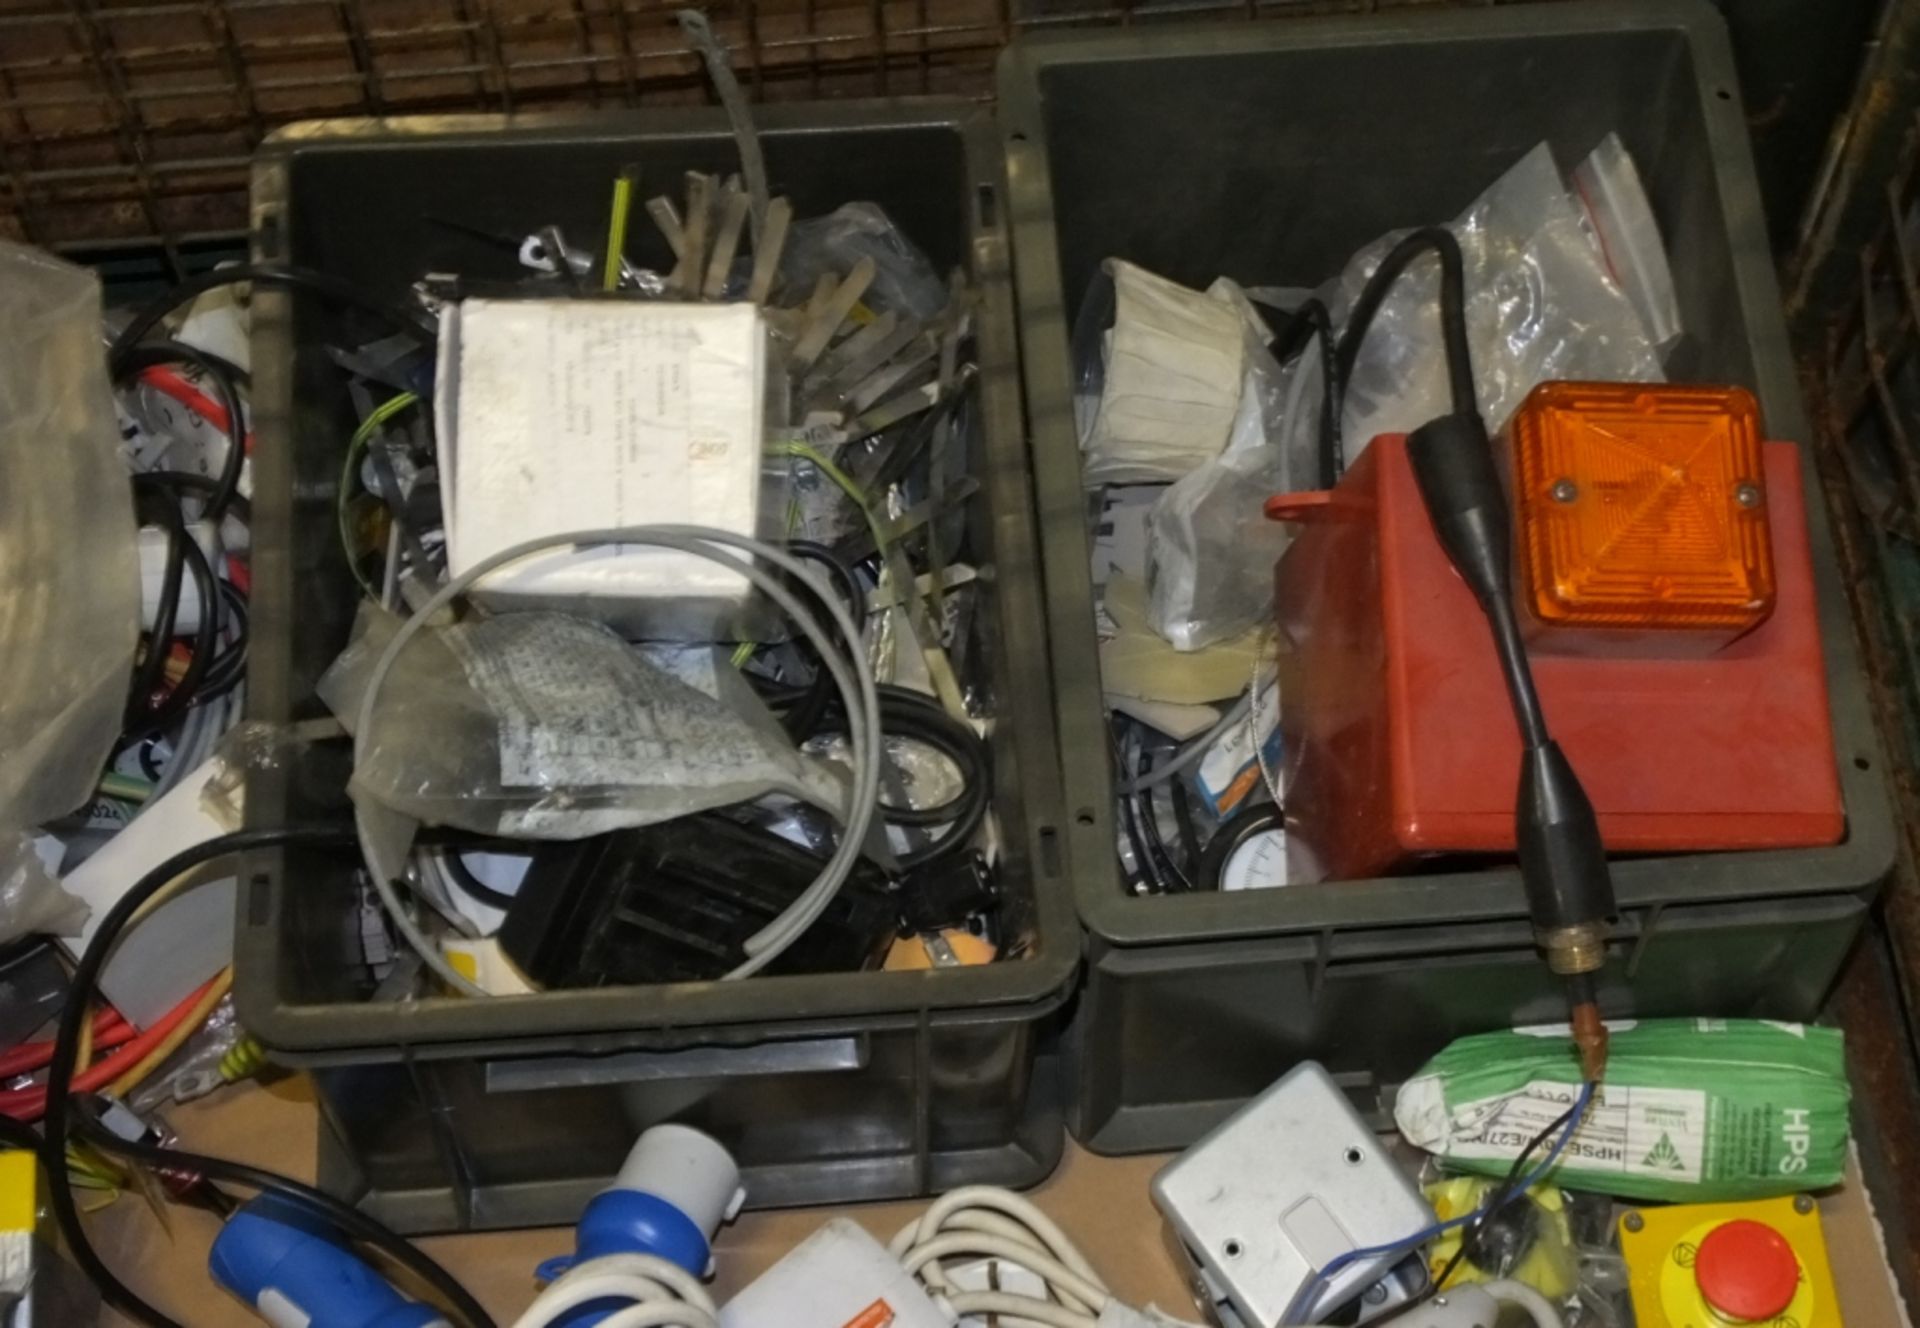 Electrical - RCDs, Isolators, Cable Glands, Batteries - Image 2 of 4